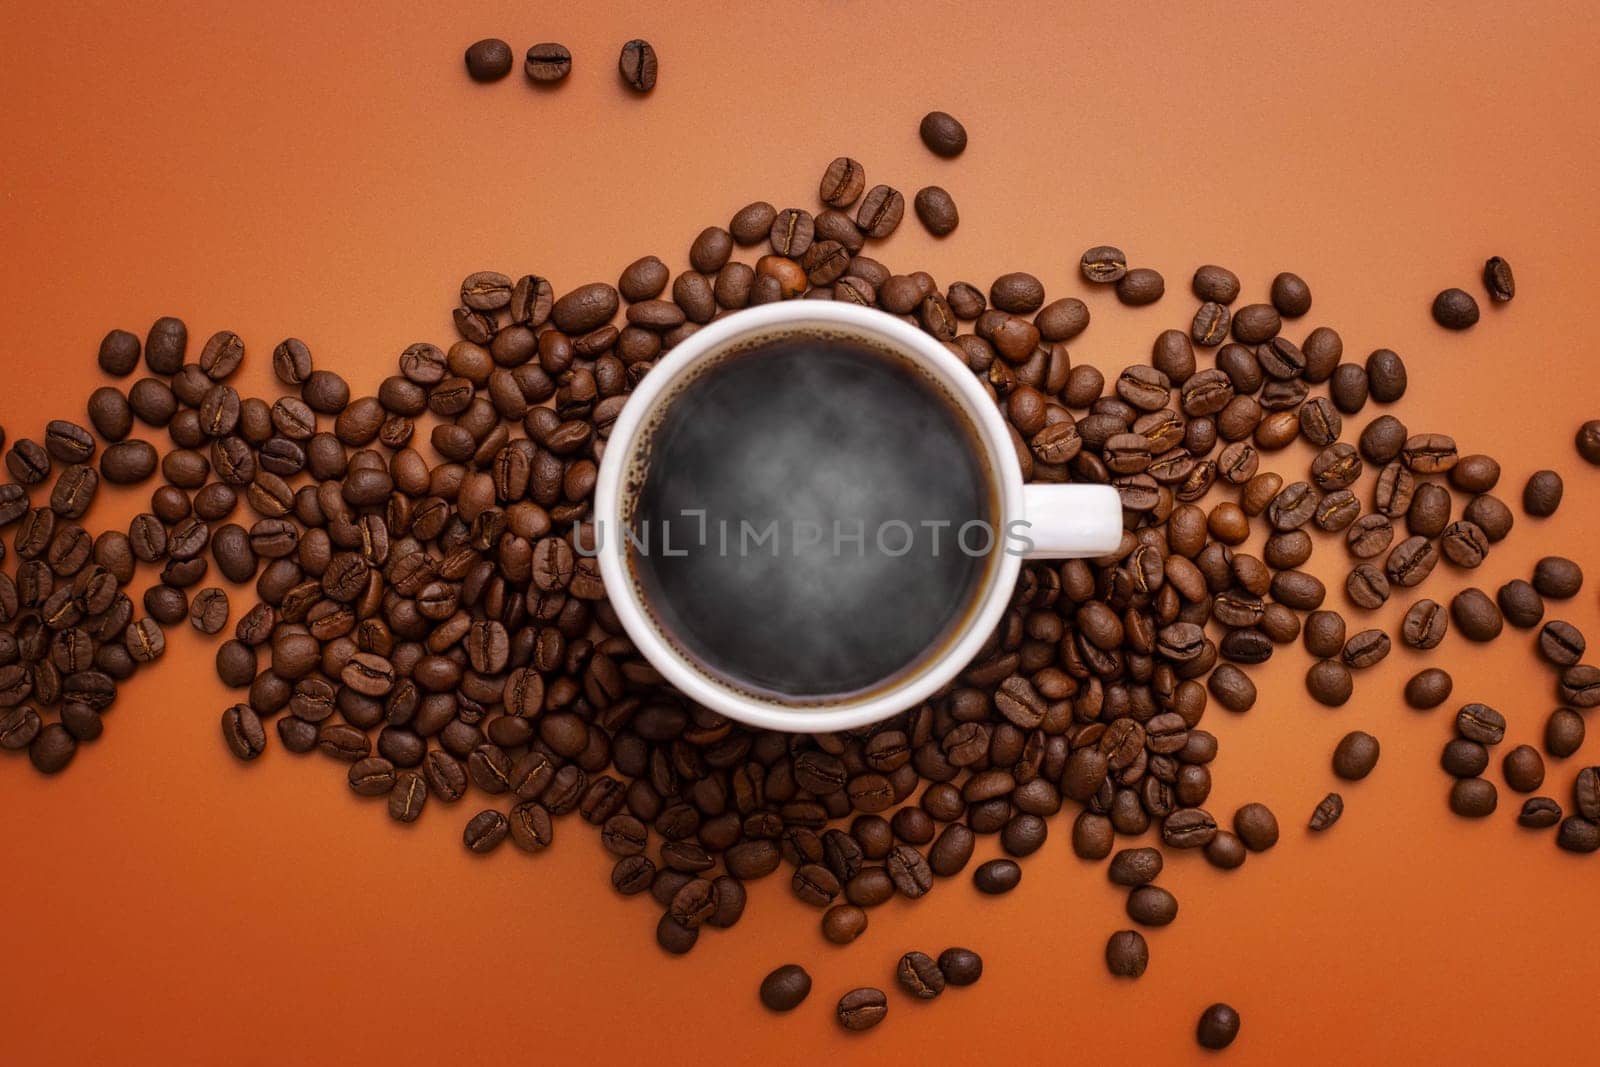 Warm cup of coffee and coffee beans on brown background. Coffee cup and coffee beans on the table.